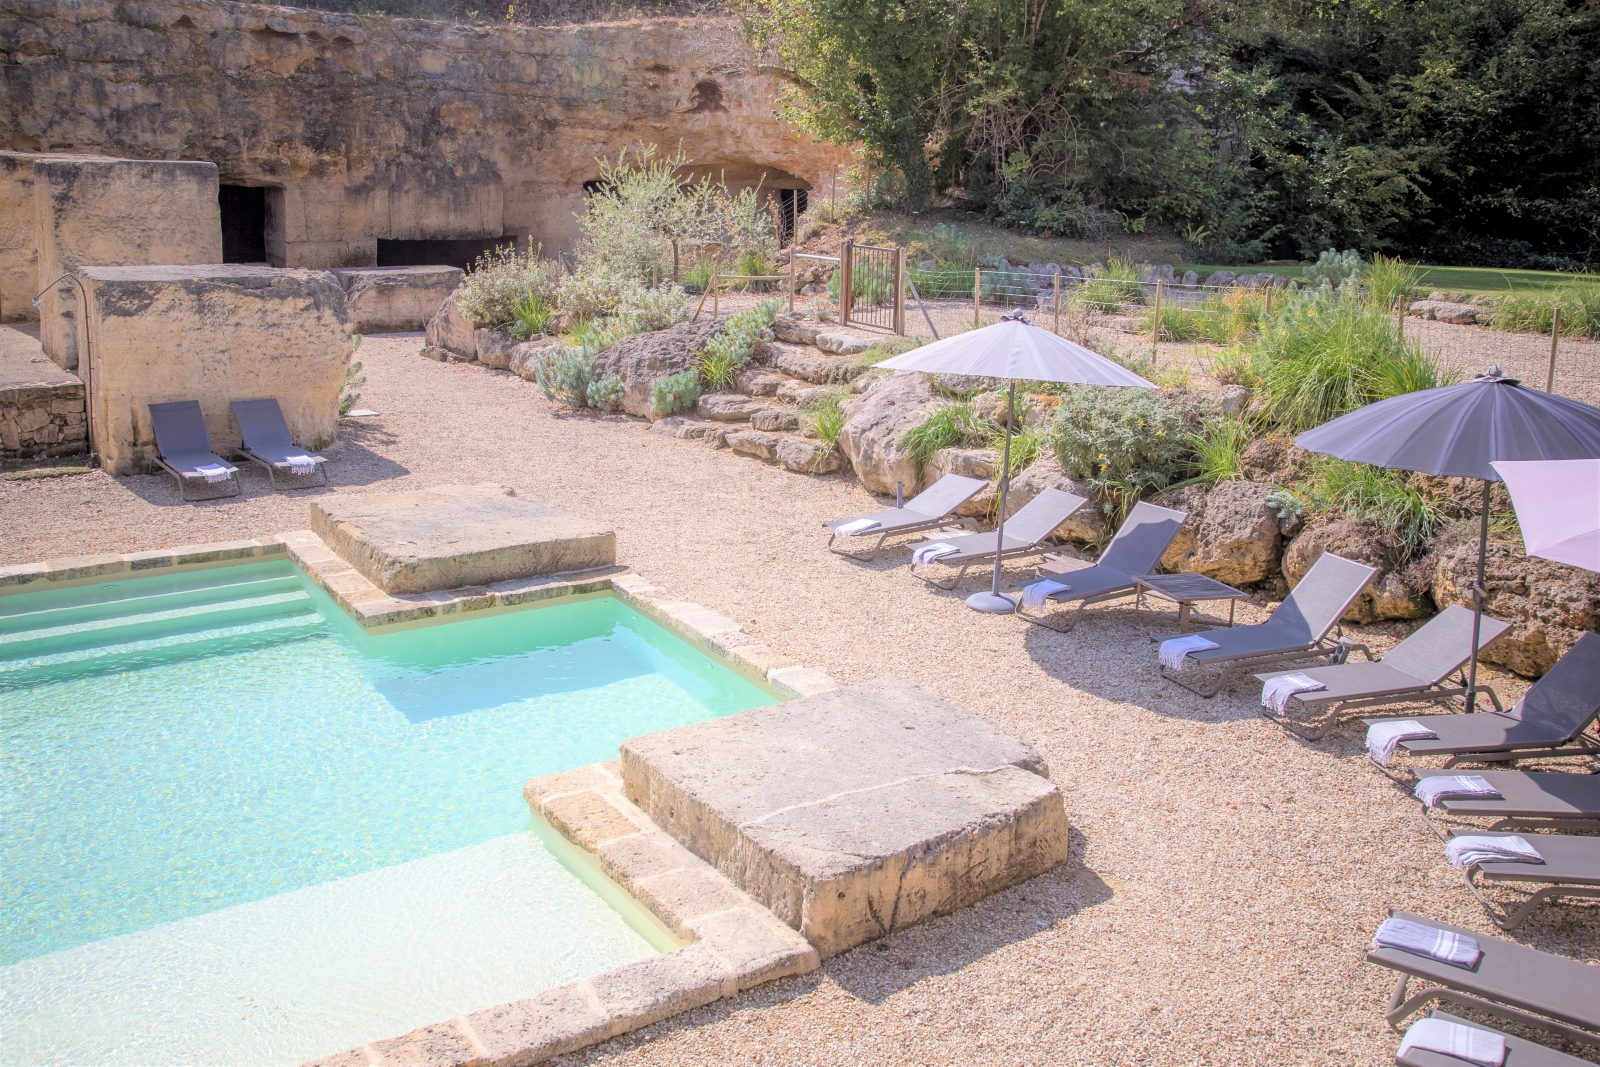 Pool and gated pool area with sun loungers, umbrellas and plants at La Colline Bleue in South West France